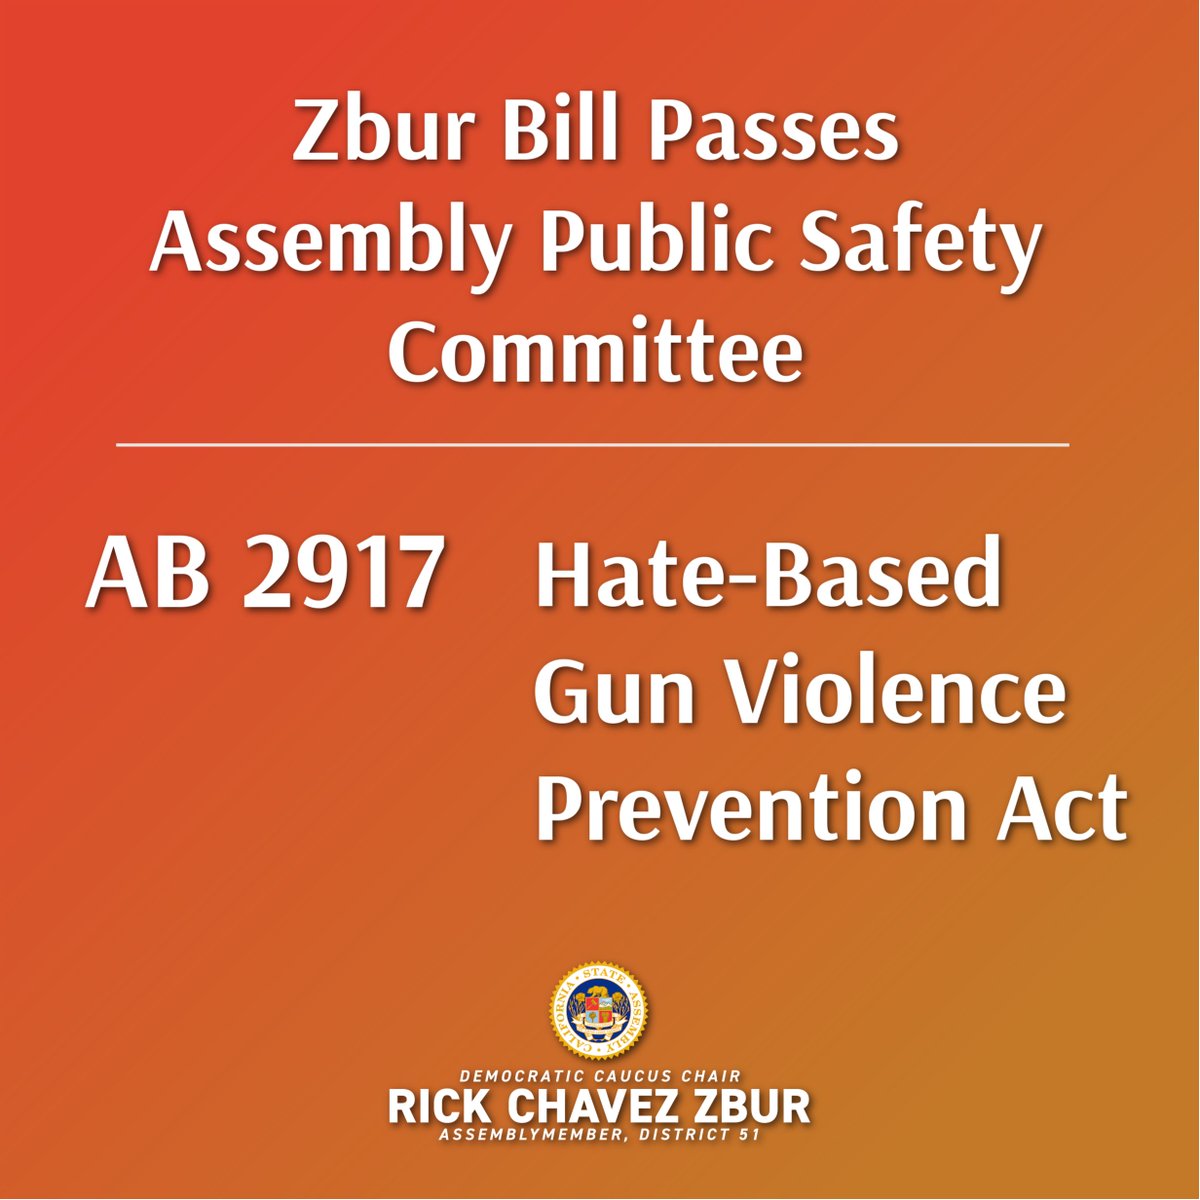 Proud to announce that #AB2917—the Hate-Based Gun Violence Prevention Act—has passed out of the Assembly Public Safety Committee. Gun violence restraining orders save lives. Thank you to sponsors @Everytown & @SFCityAttorney @DavidChiu for your support!